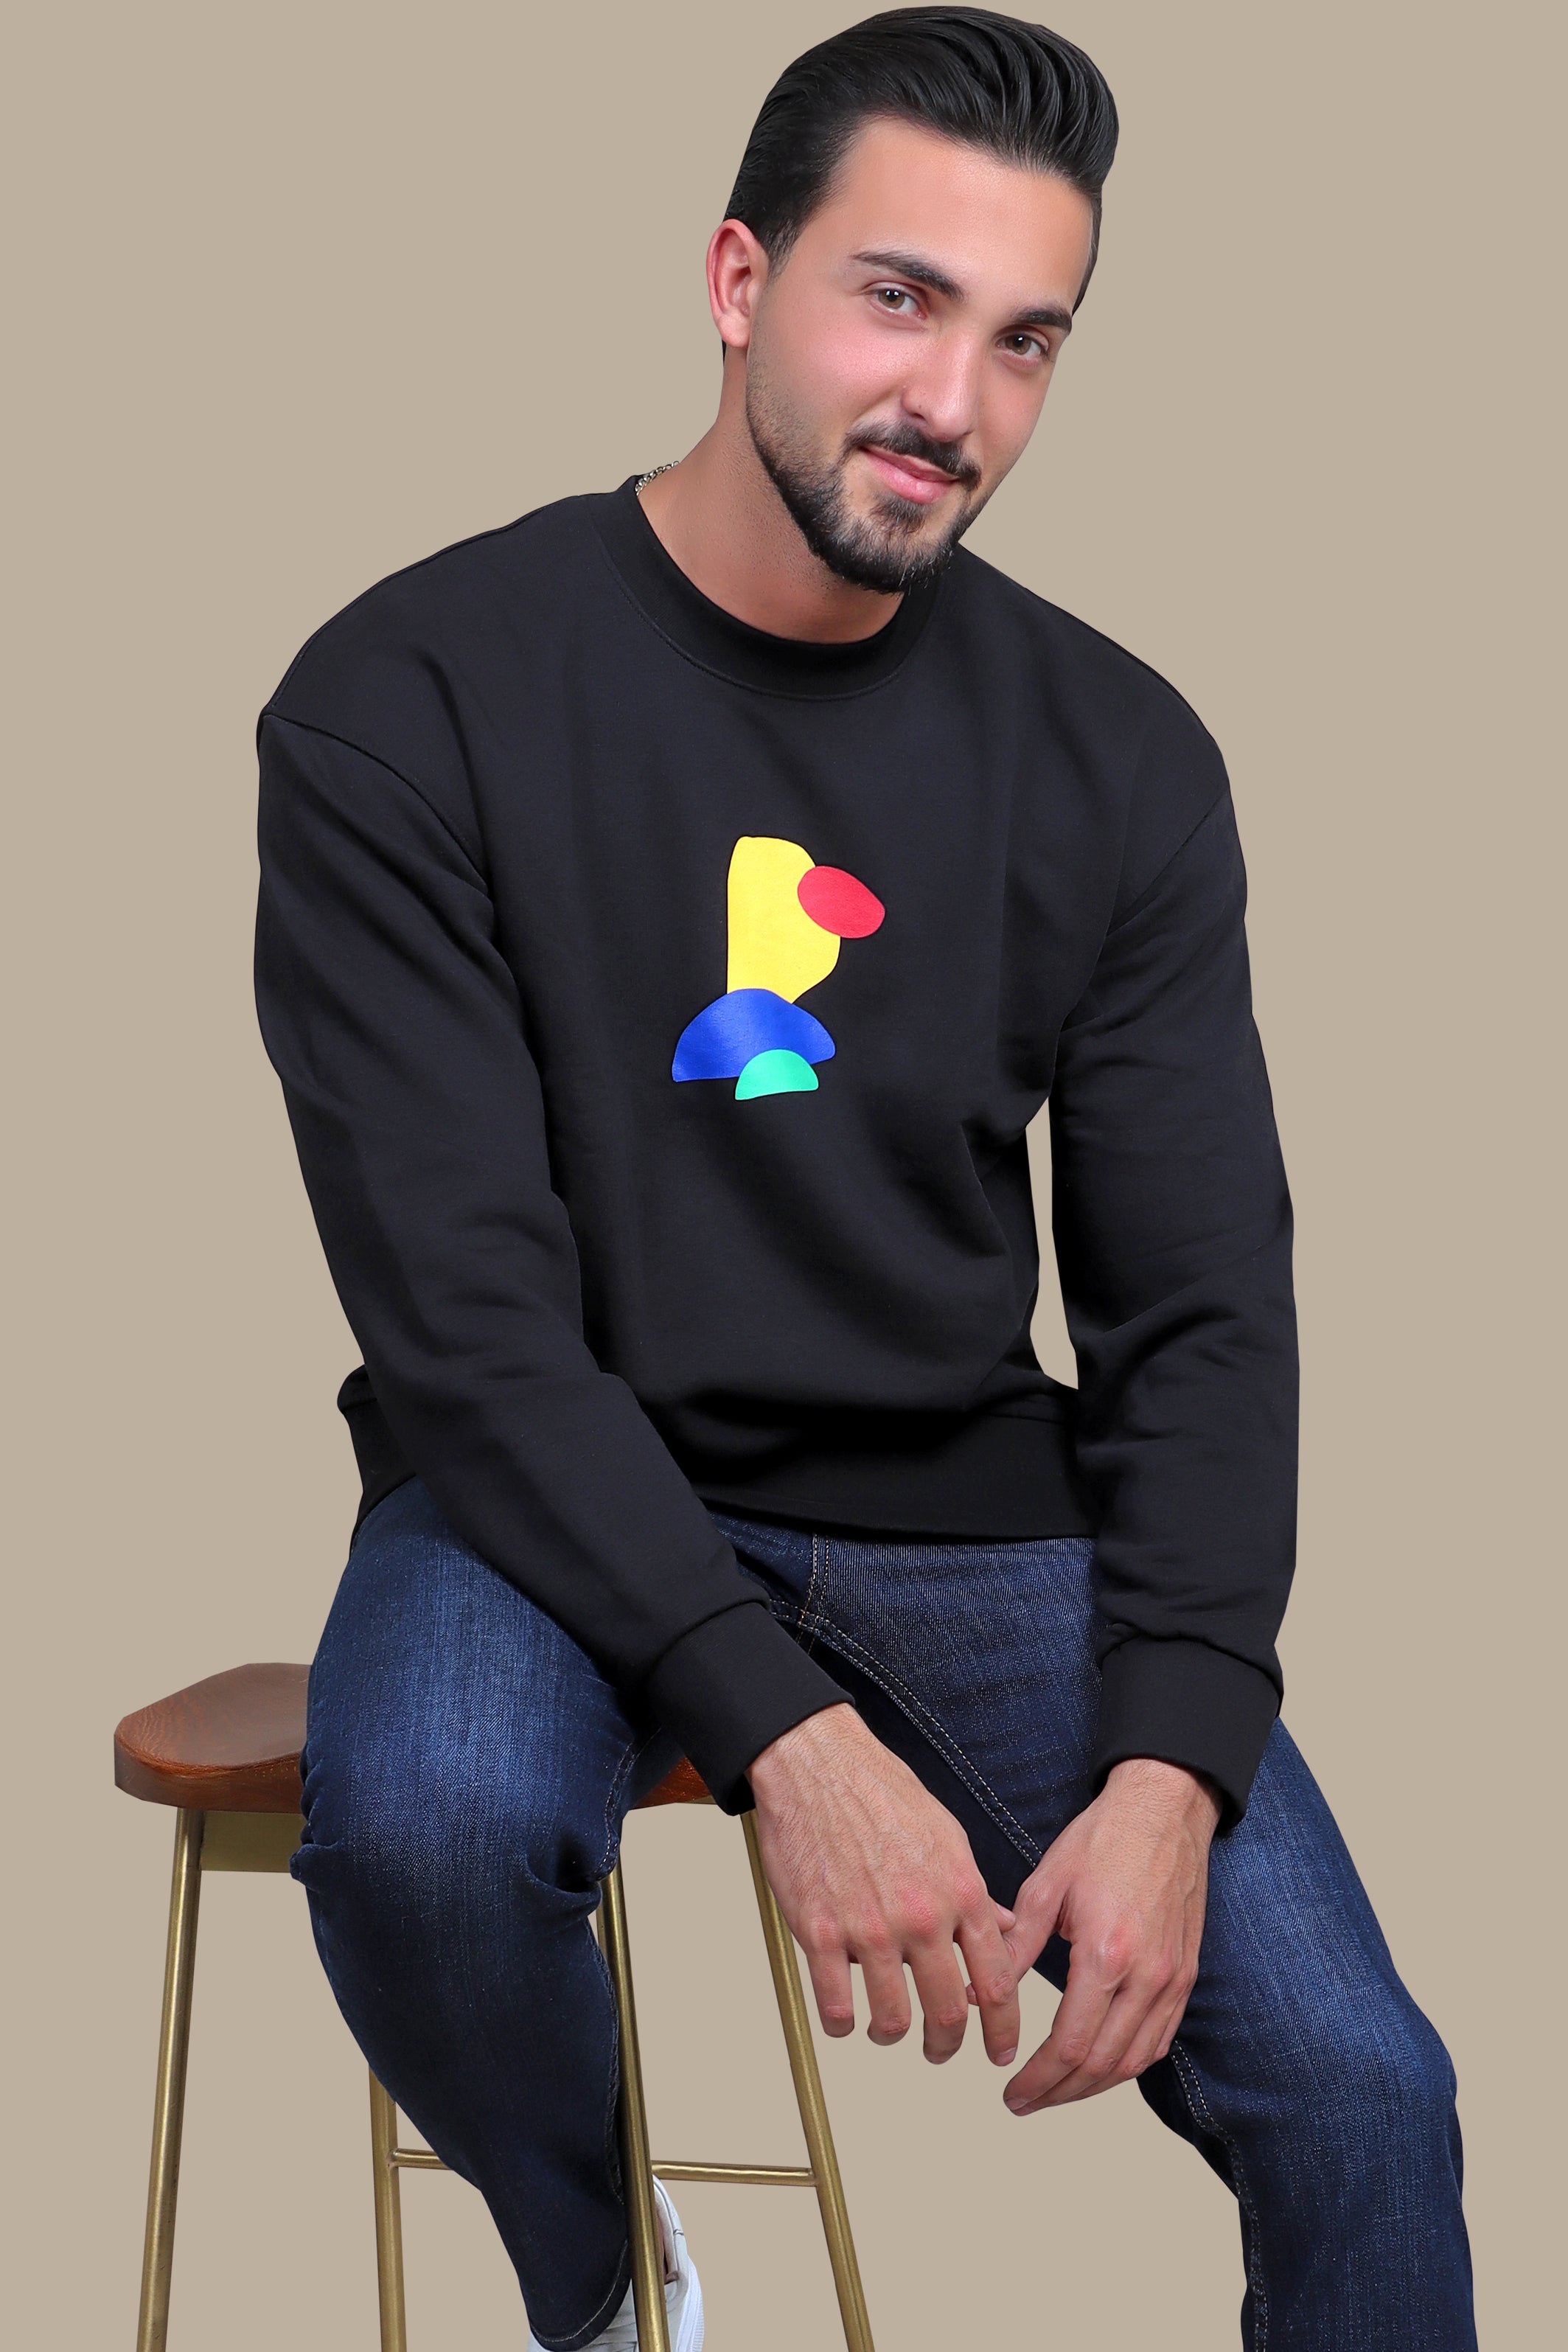 Subtle Statements: Black Sweatshirt with Small Print Accents